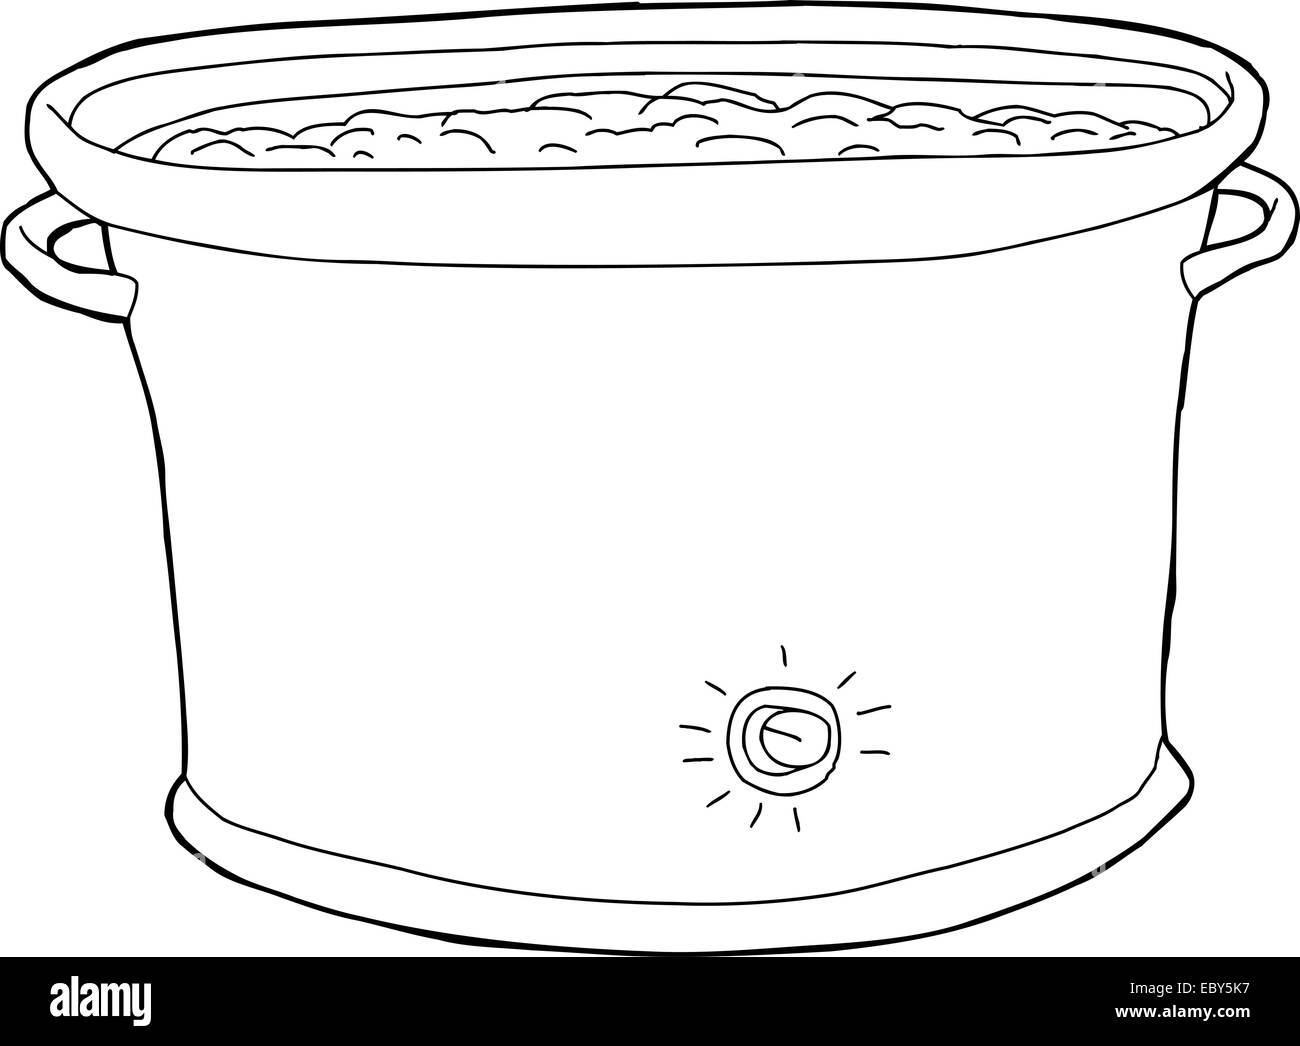 Outline cartoon of crock pot with food inside Stock Photo